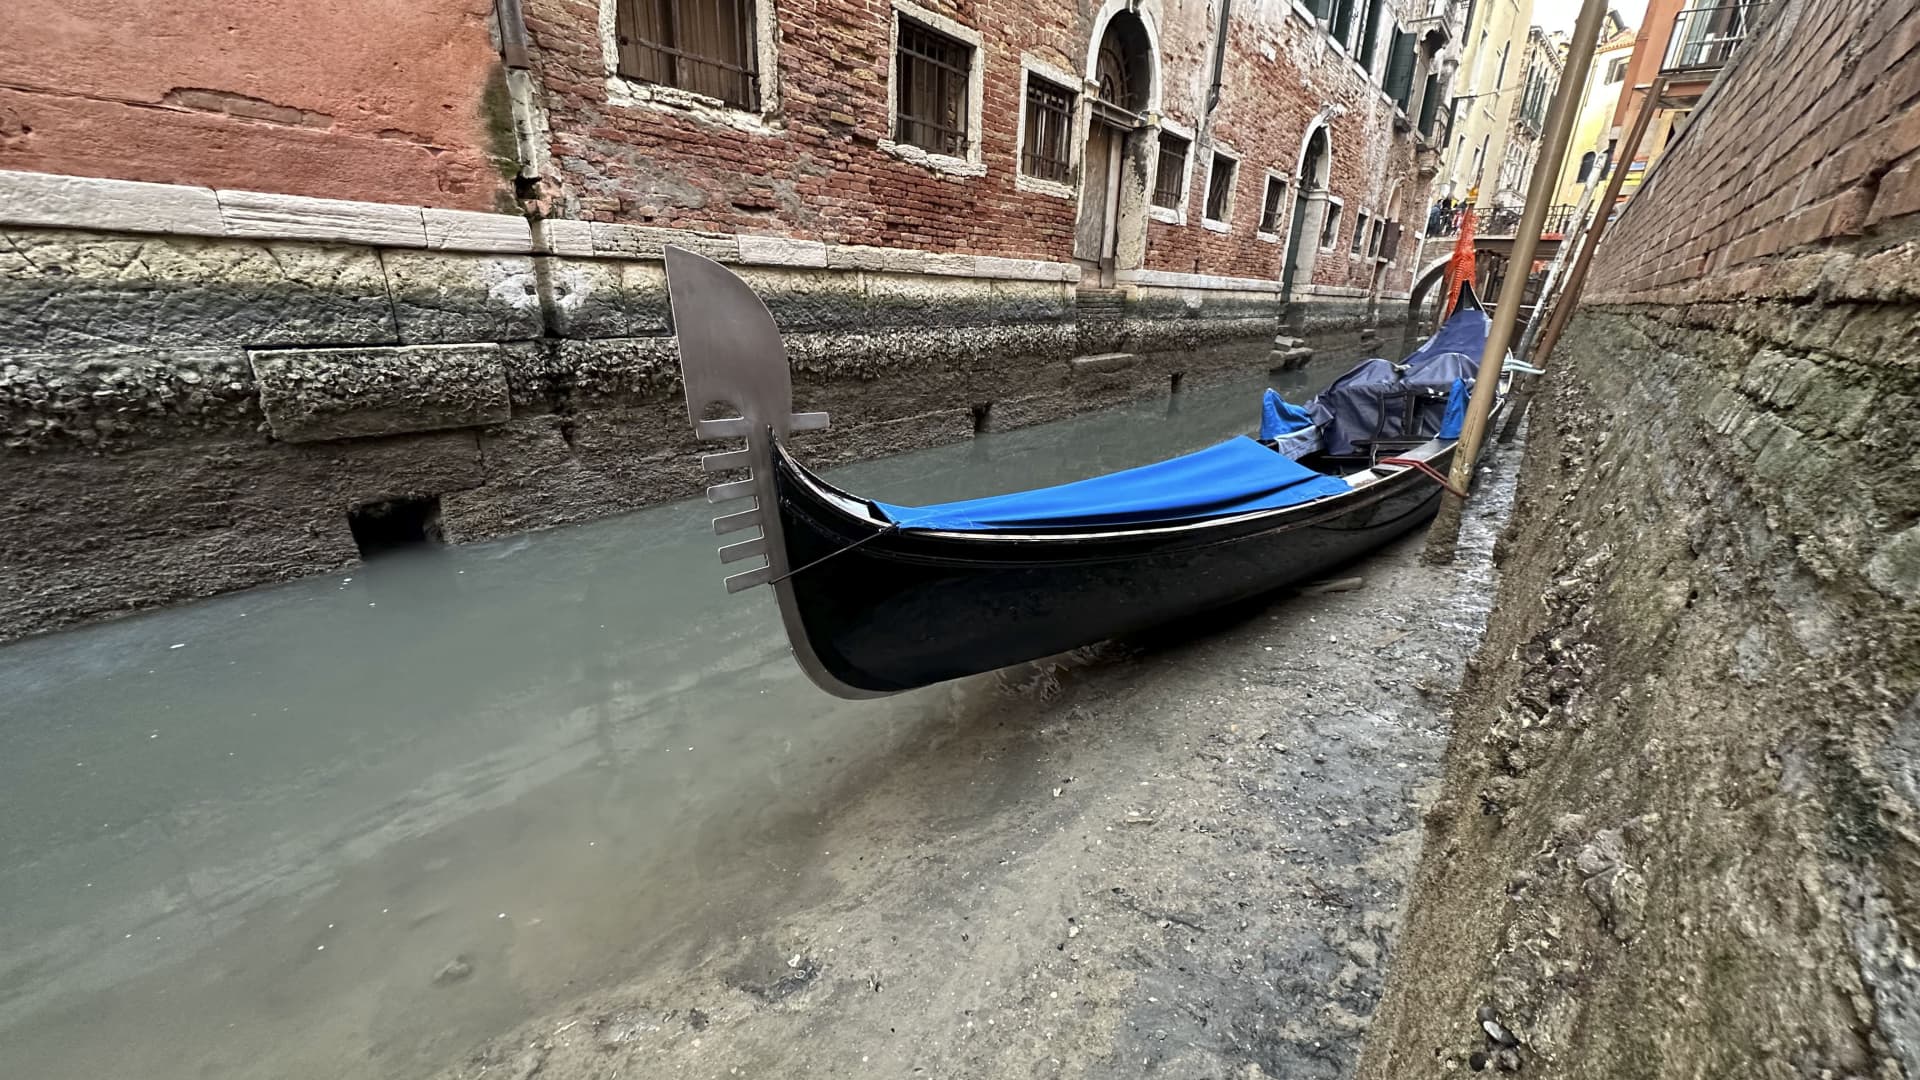 Photos show Venice’s canals running dry amid low tides